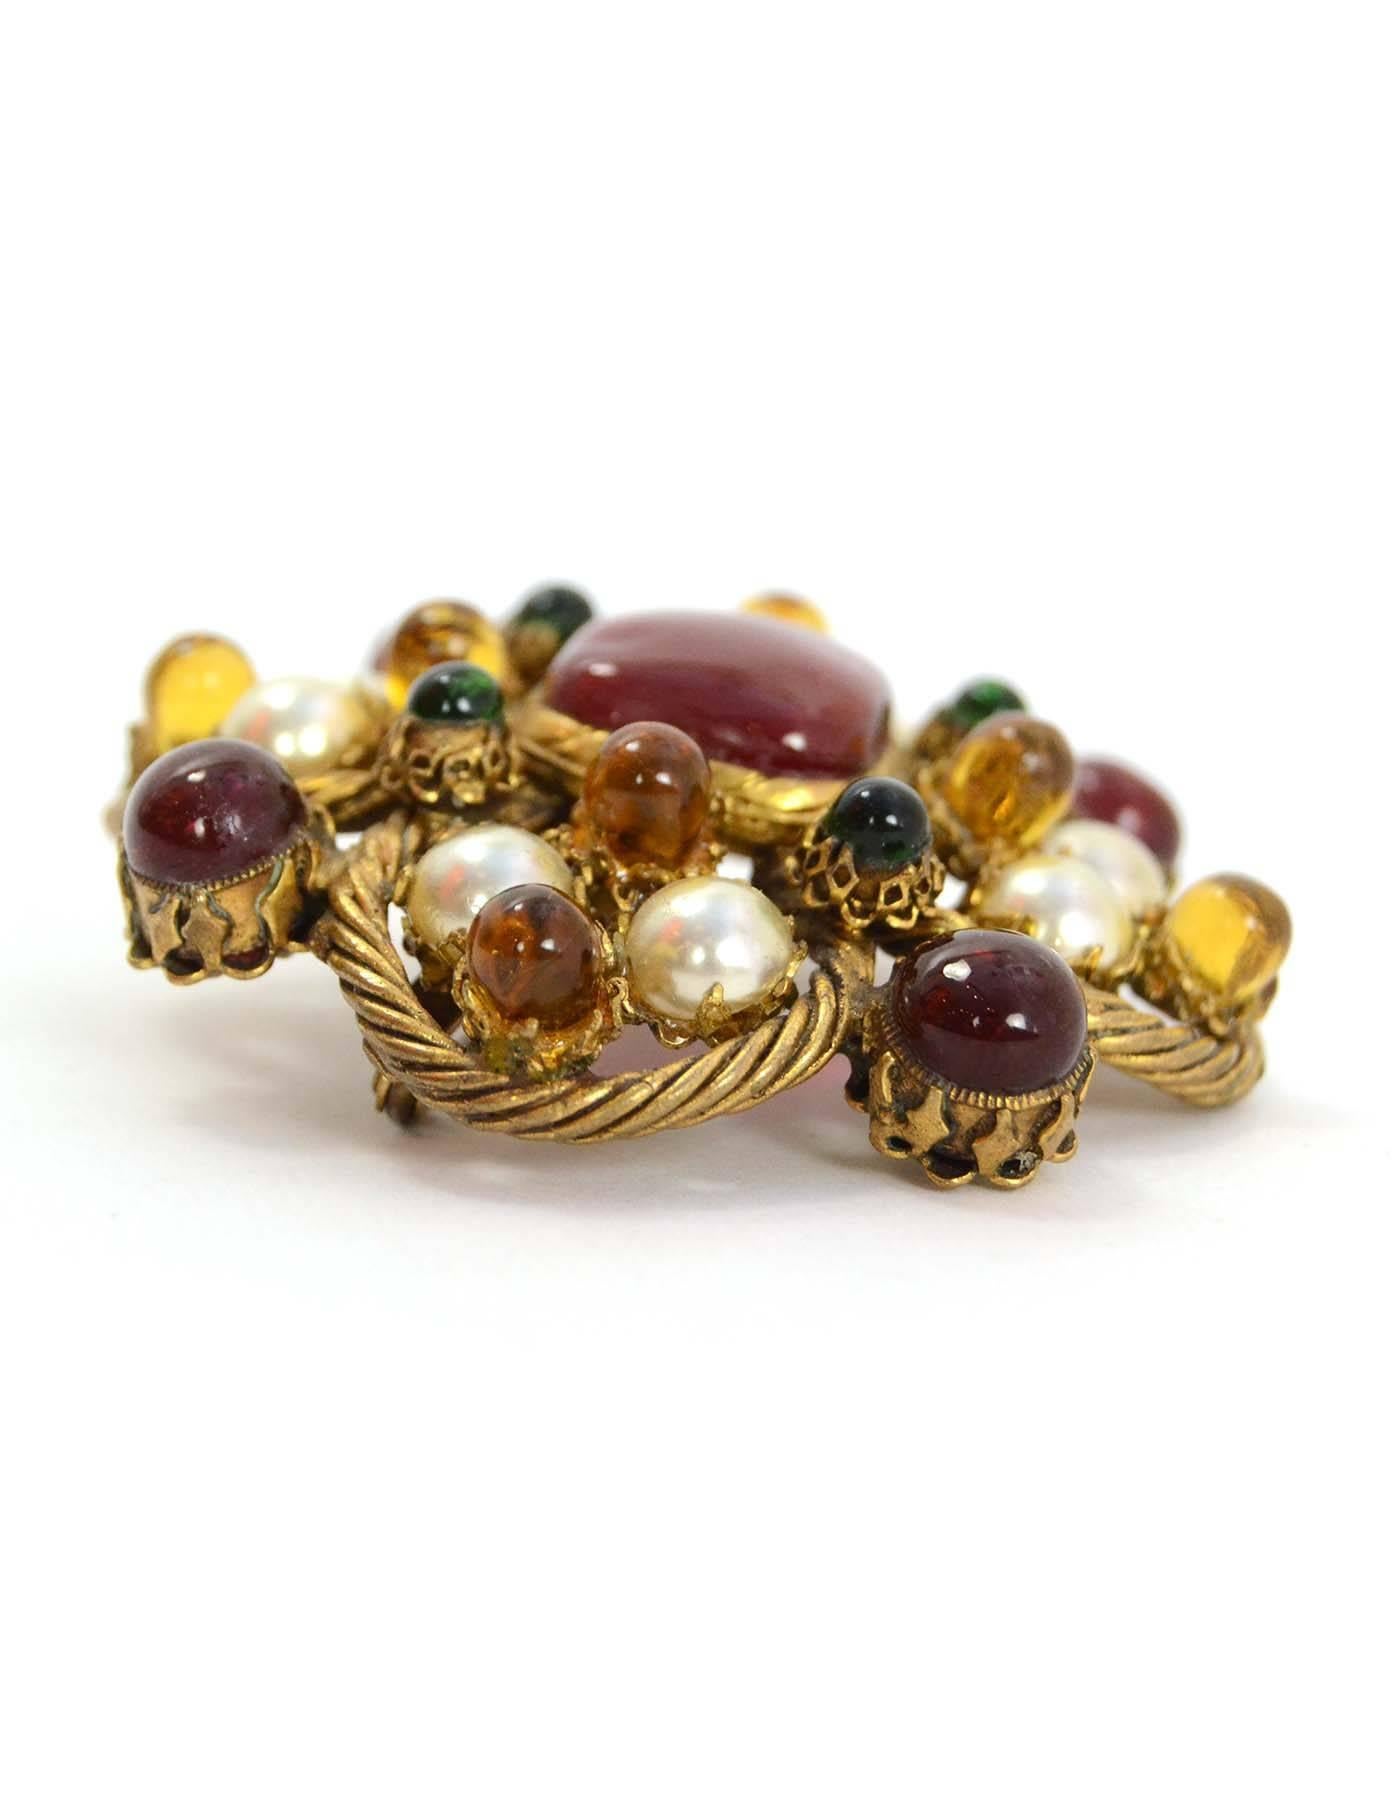 Chanel Vintage '93 Multi-Color Gripoix & Pearl Cluster Brooch
Features twisted goldtone metal detailing throughout
Made In: France
Year of Production: 1993
Color: Goldtone, red, amber, green, and ivory
Materials: Metal, gripoix, and faux